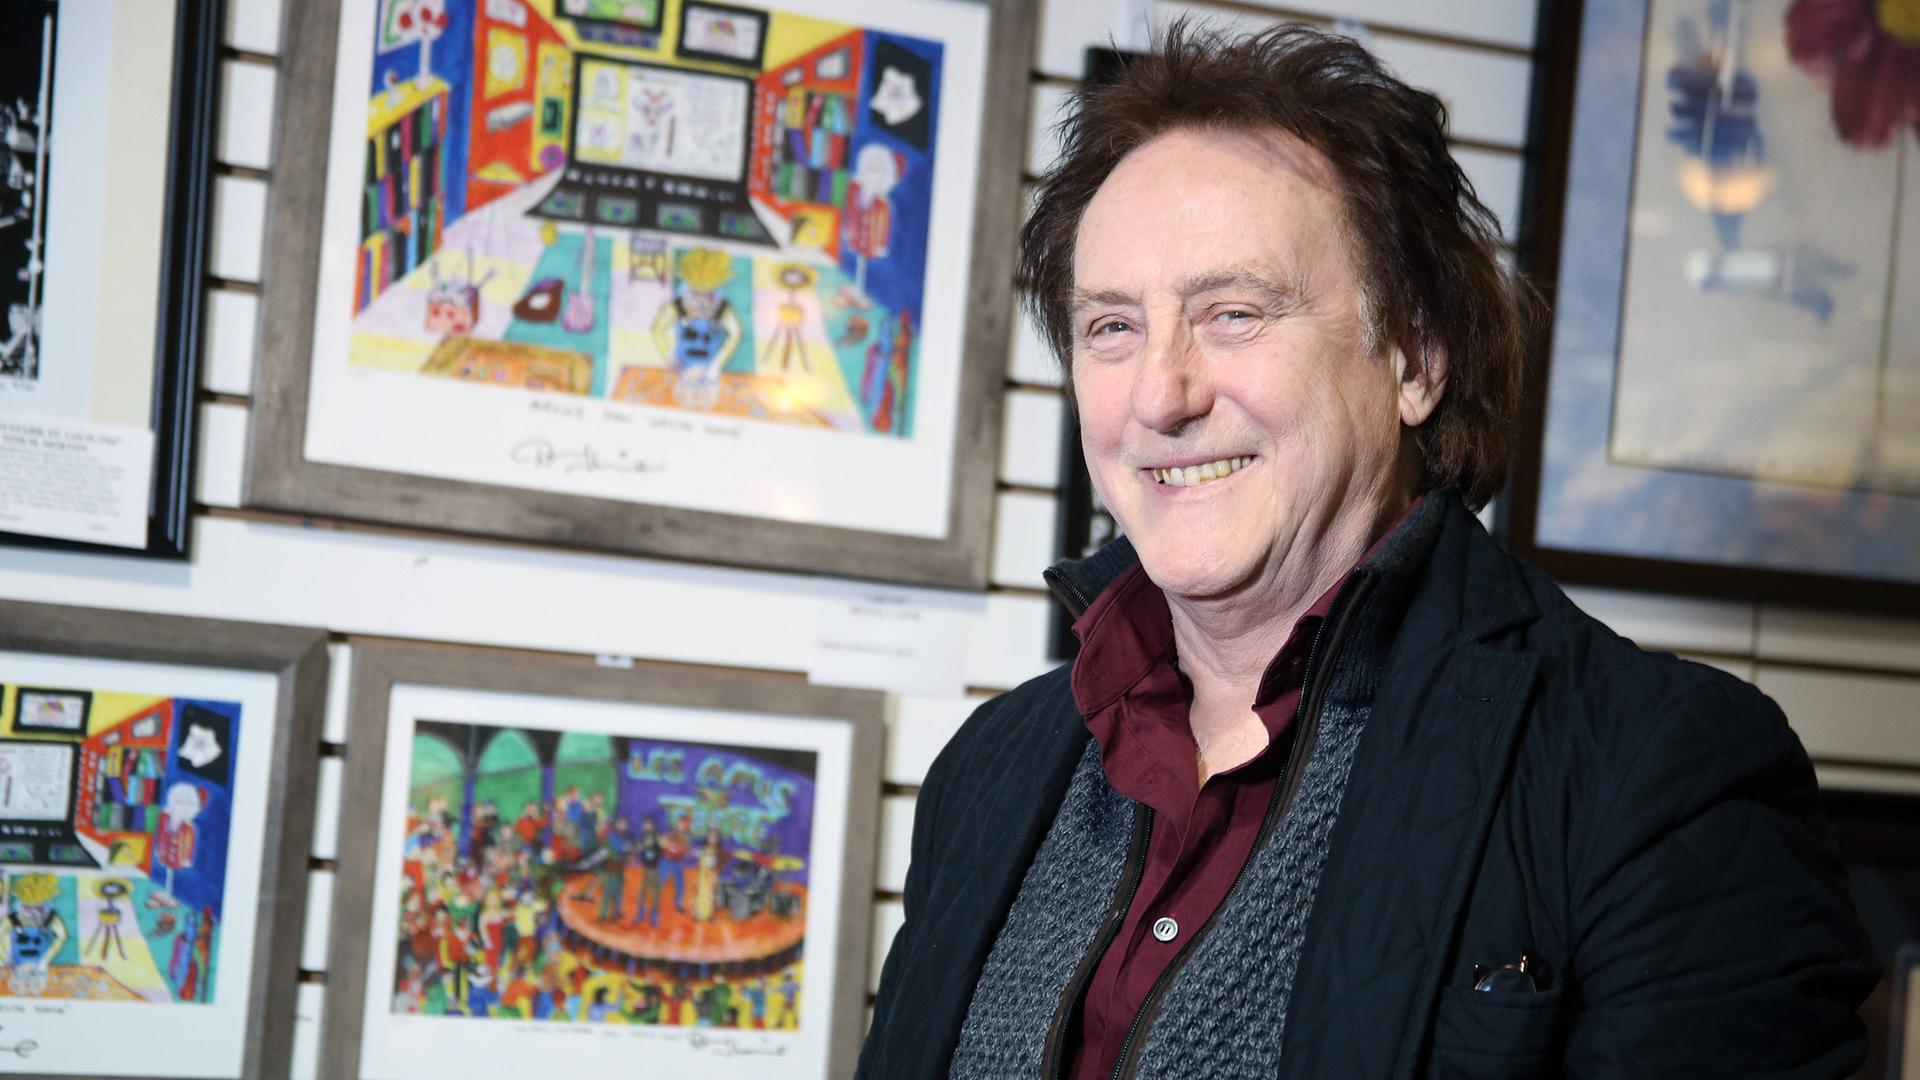 **FILE PHOTO** Denny Laine Has Passed Away. WILLOW GROVE, PA - DECEMBER 18 : Denny Laine pictured with his art at the Rock Art Show in Willow Grove Park Mall in Willow Grove, Pa on December 18, 2016 photo credit Star Shooter/MediaPunch Copyright: x xStarxShooterx